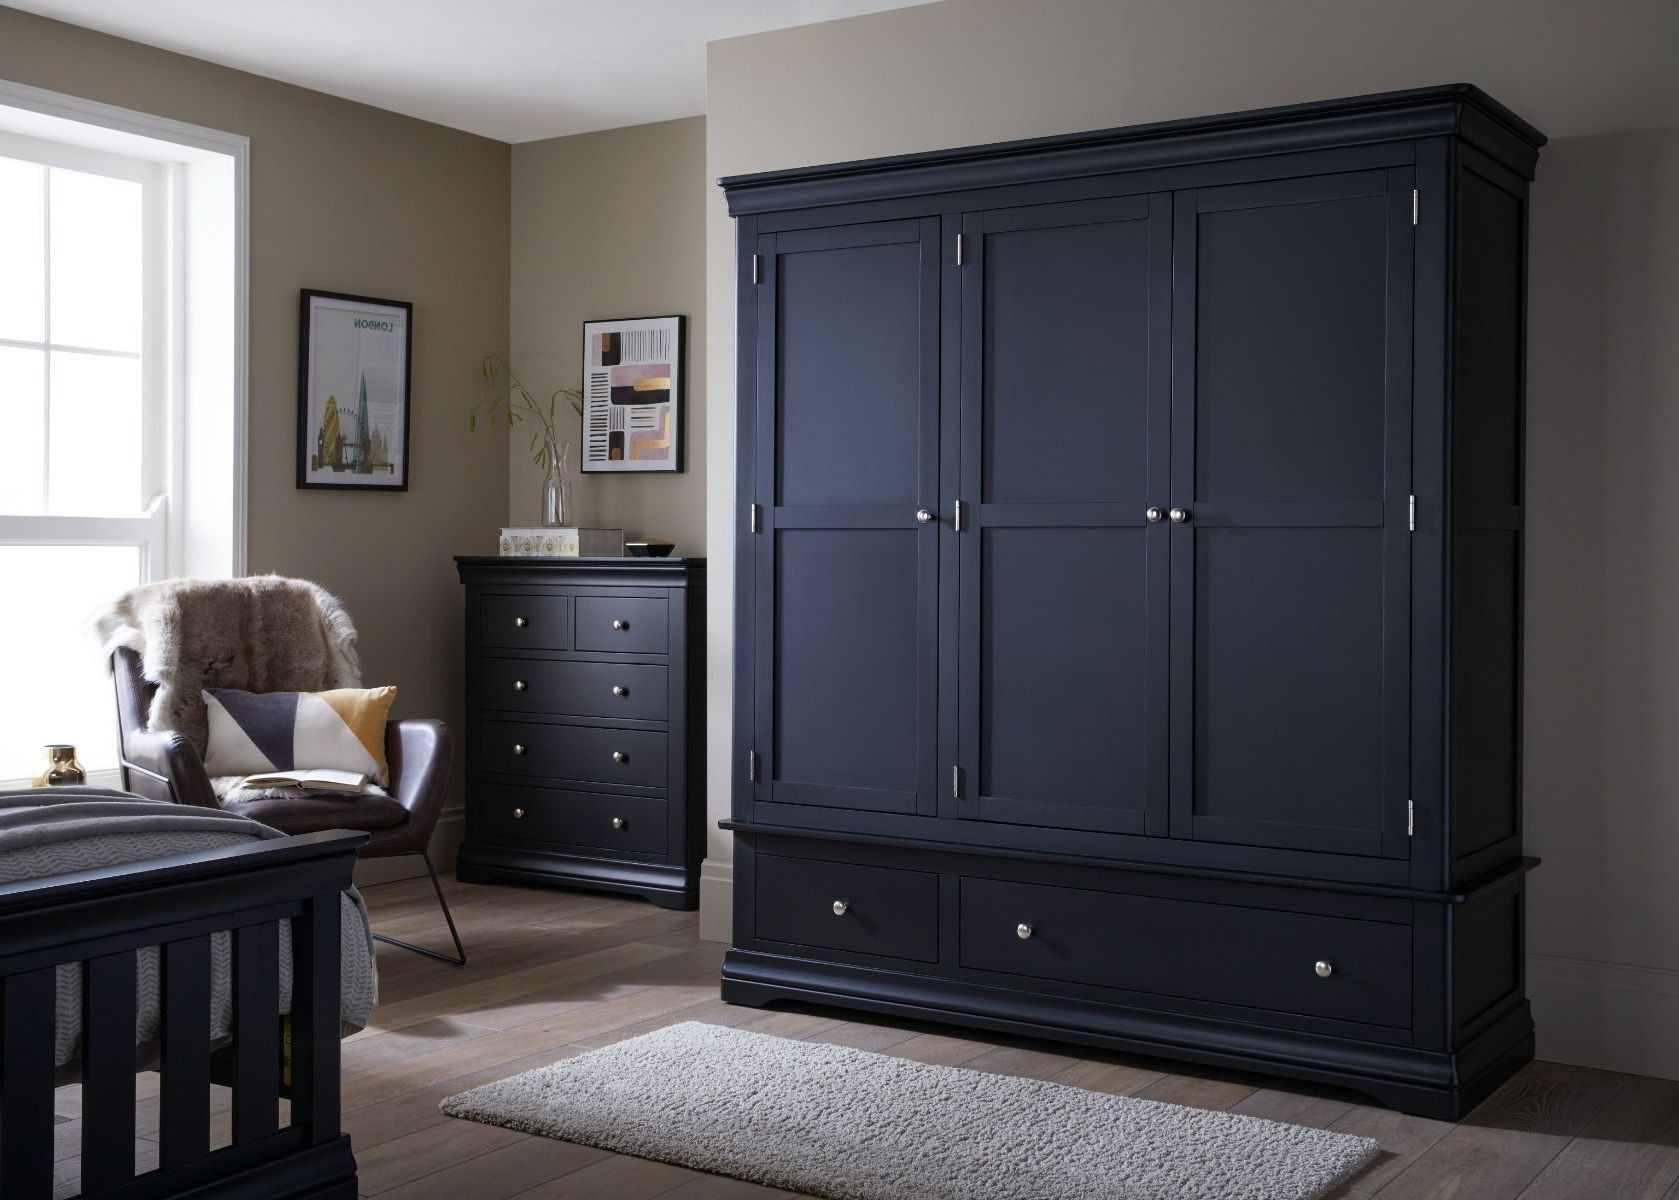 Toulouse Black Painted Large Triple Wardrobe With Drawer Regarding Cheap Wardrobes And Chest Of Drawers (View 5 of 20)